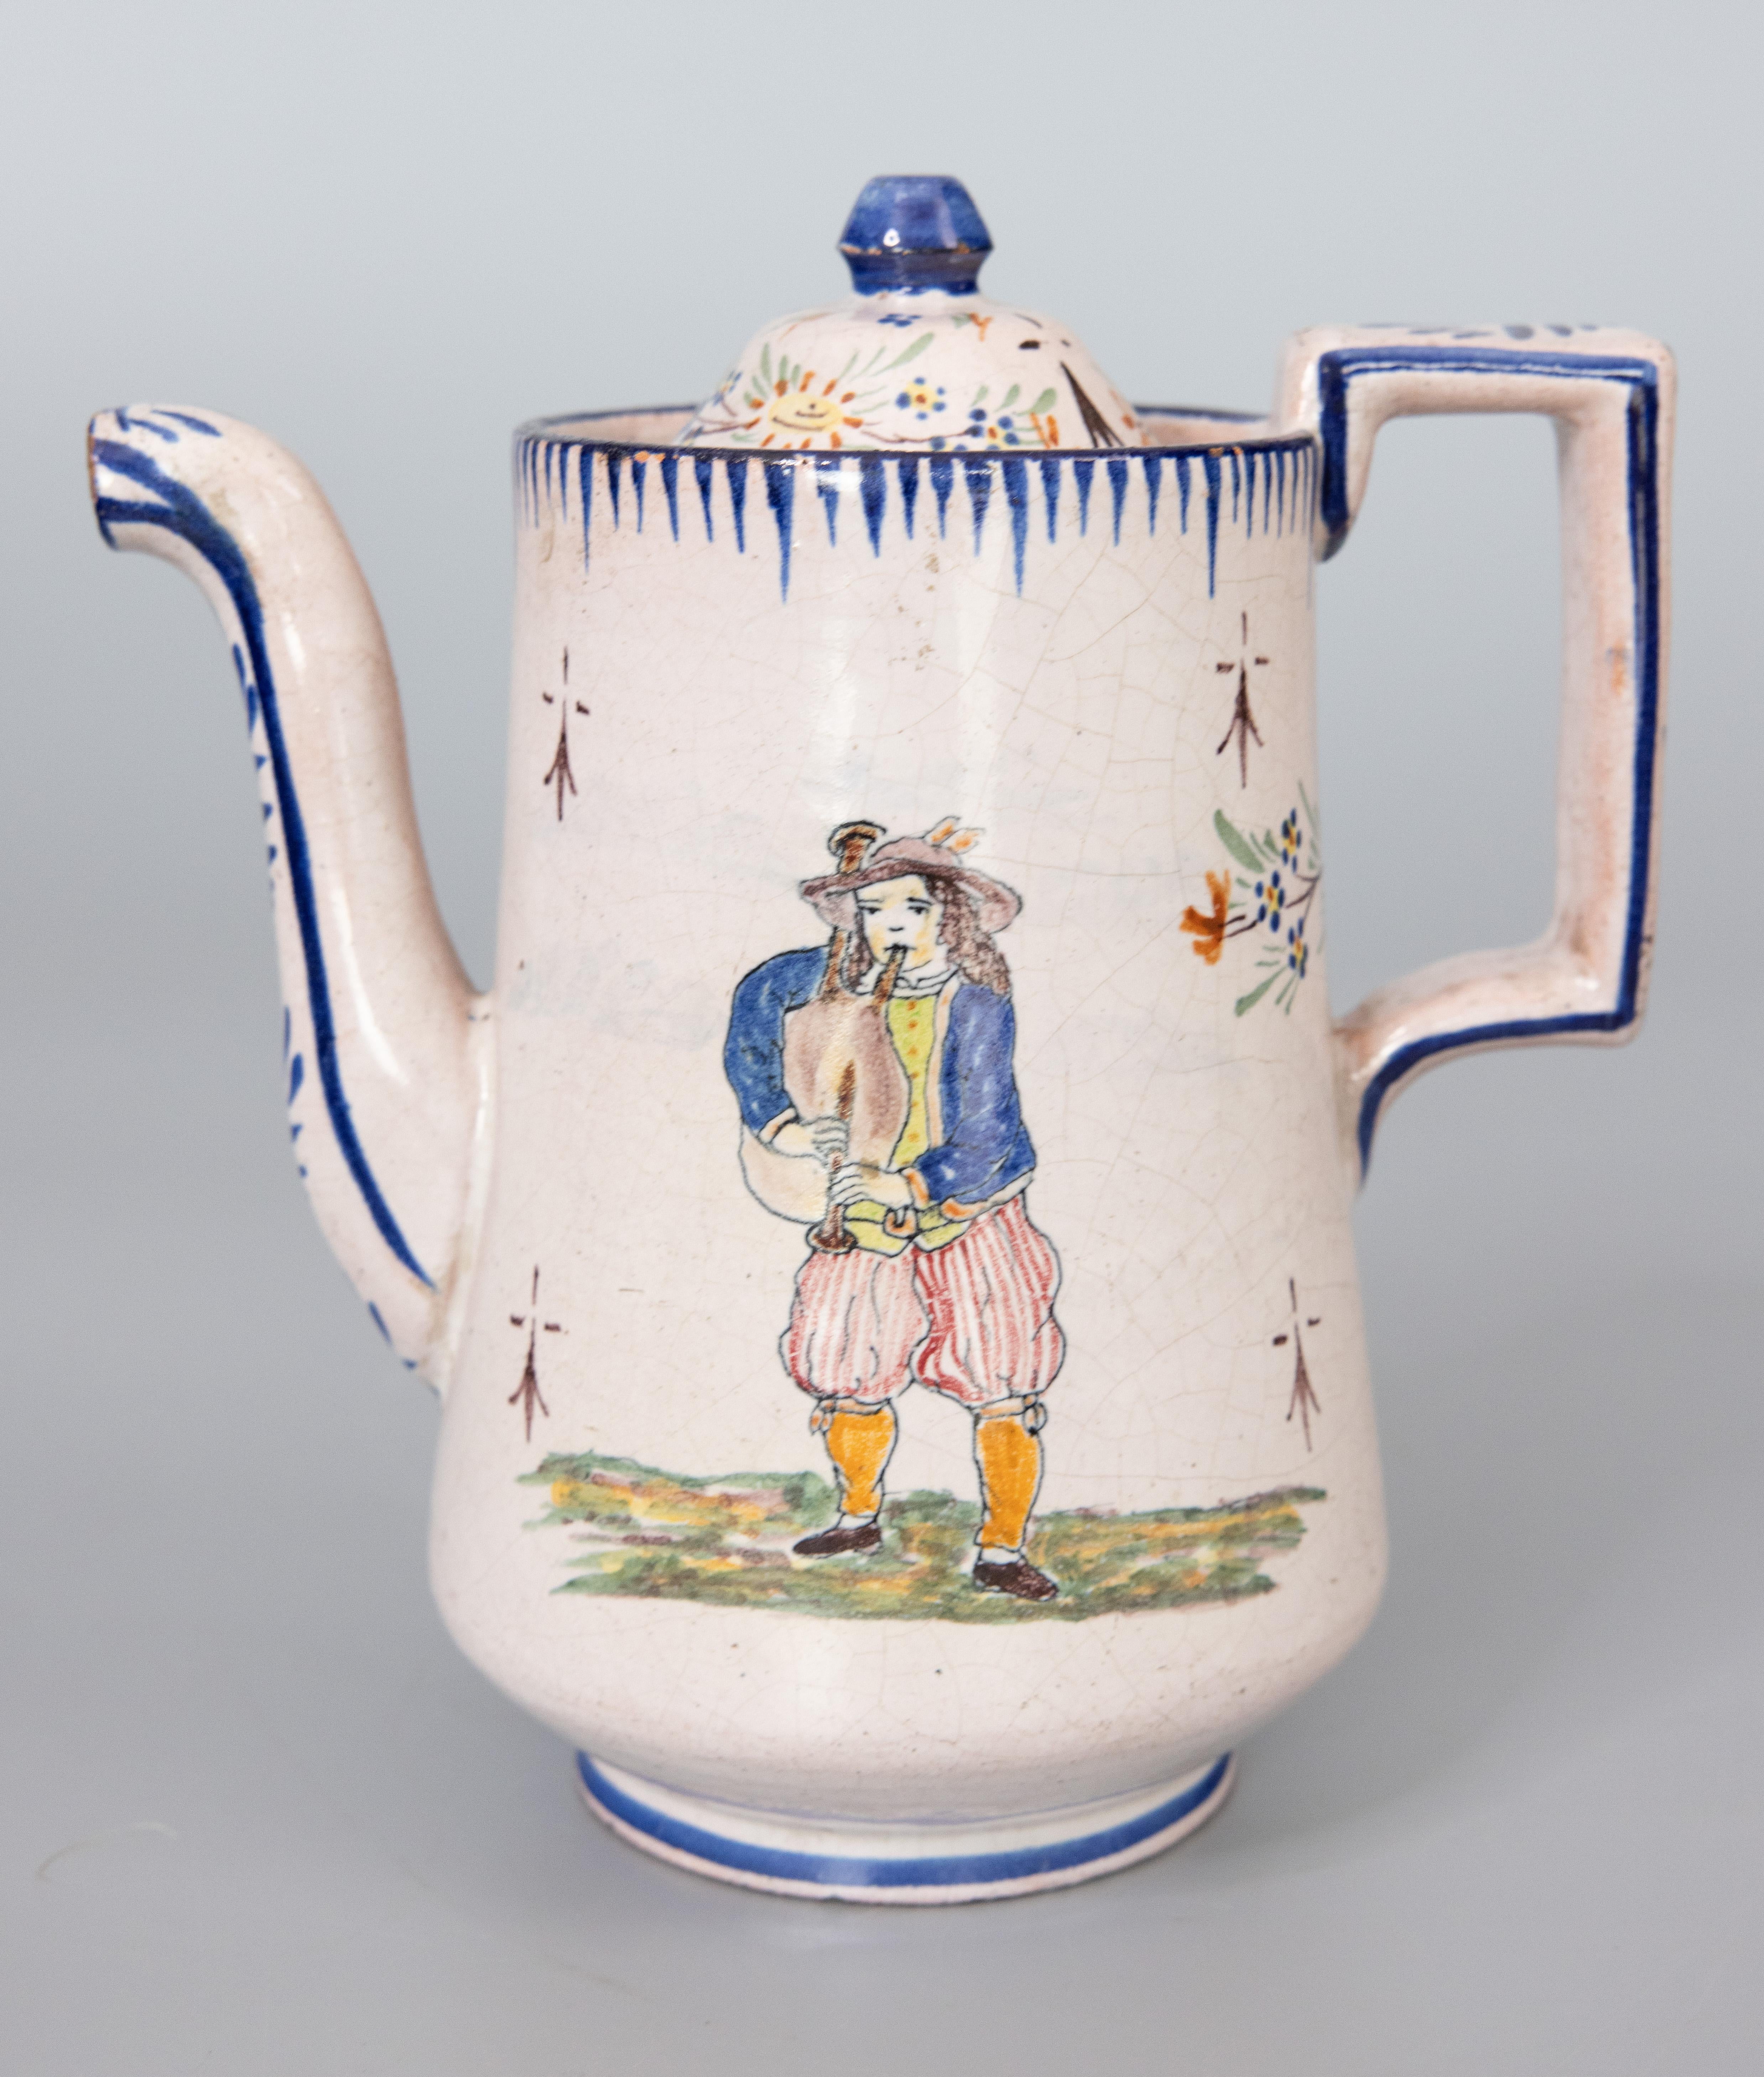 A superb antique French provincial Malicorne faience teapot from Pouplard-Beatrix, circa 1890. Signed PBx on reverse. This charming tea pot depicts a young Breton woman carrying a basket and umbrella and the opposite side depicts a young Breton man